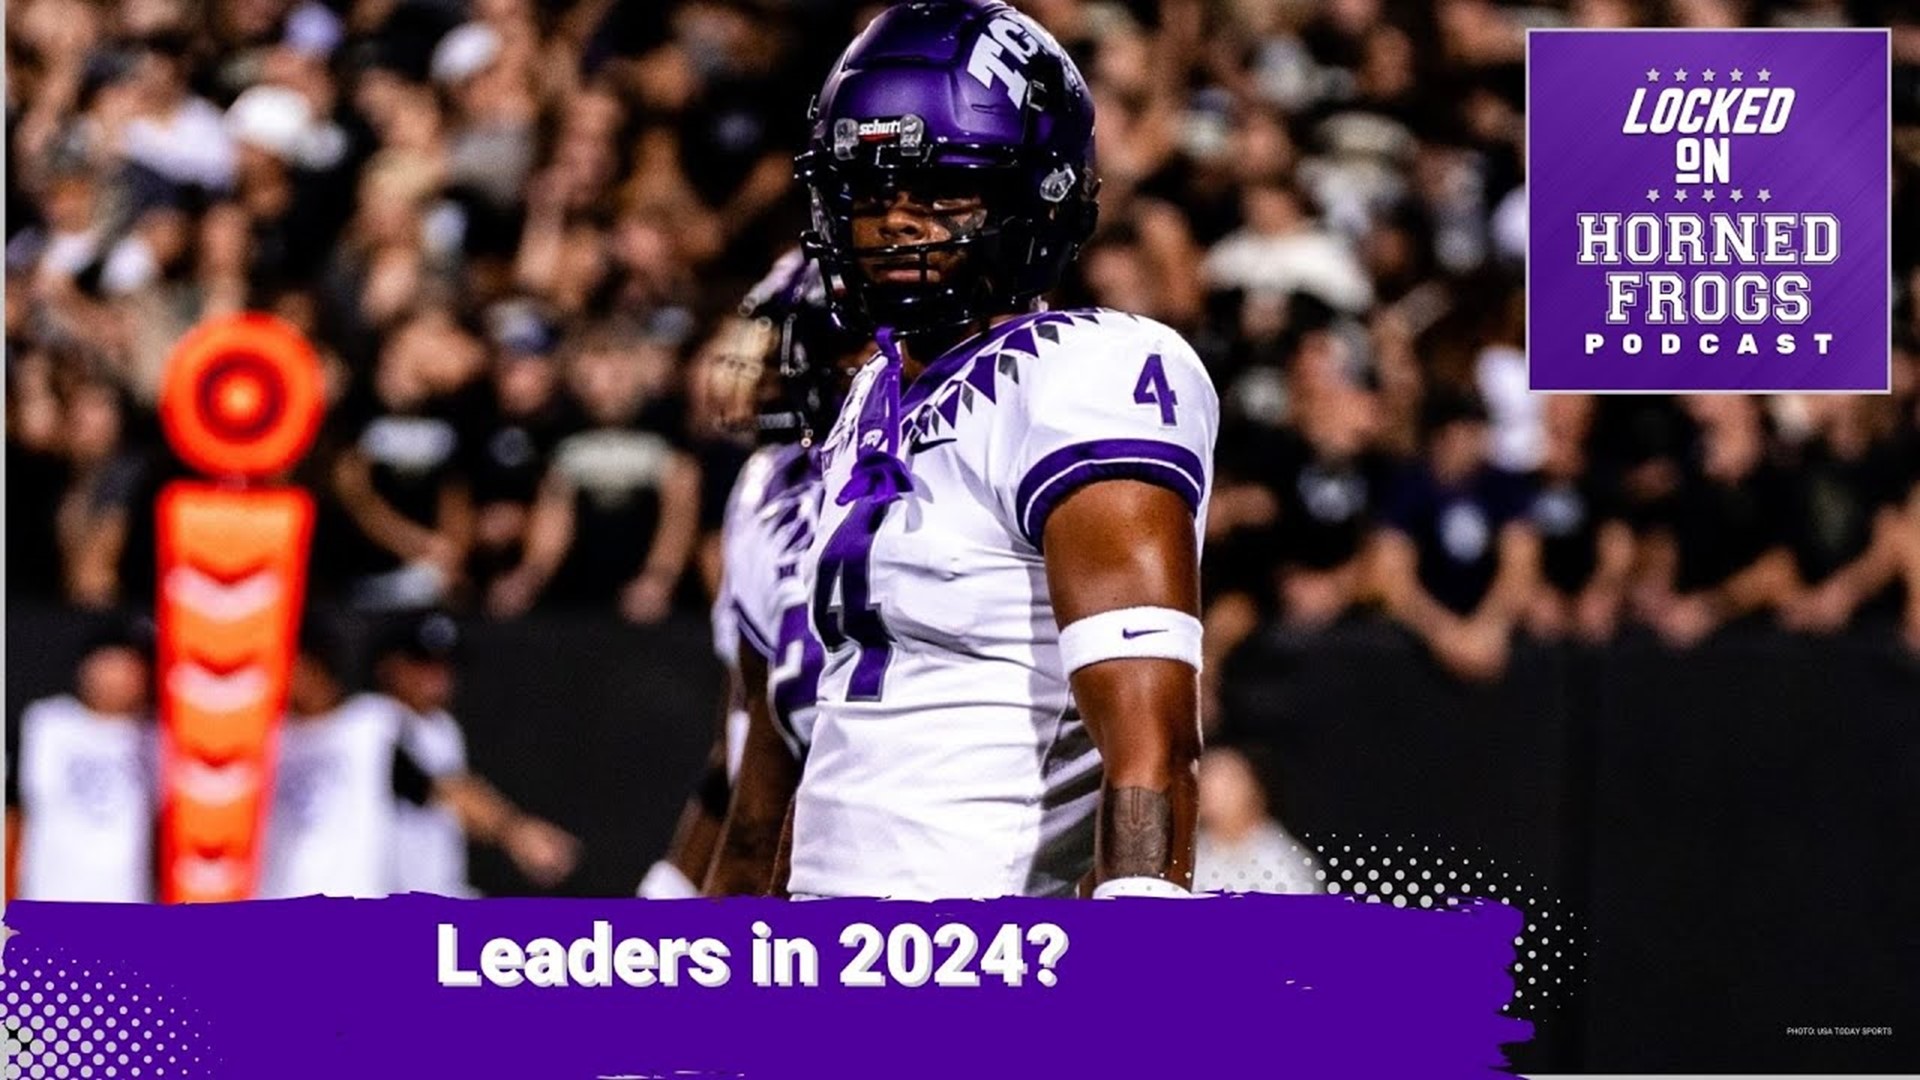 Where will the leadership in 2024 come from for TCU football? We discuss that and the best players on the team on Locked on Horned Frogs.